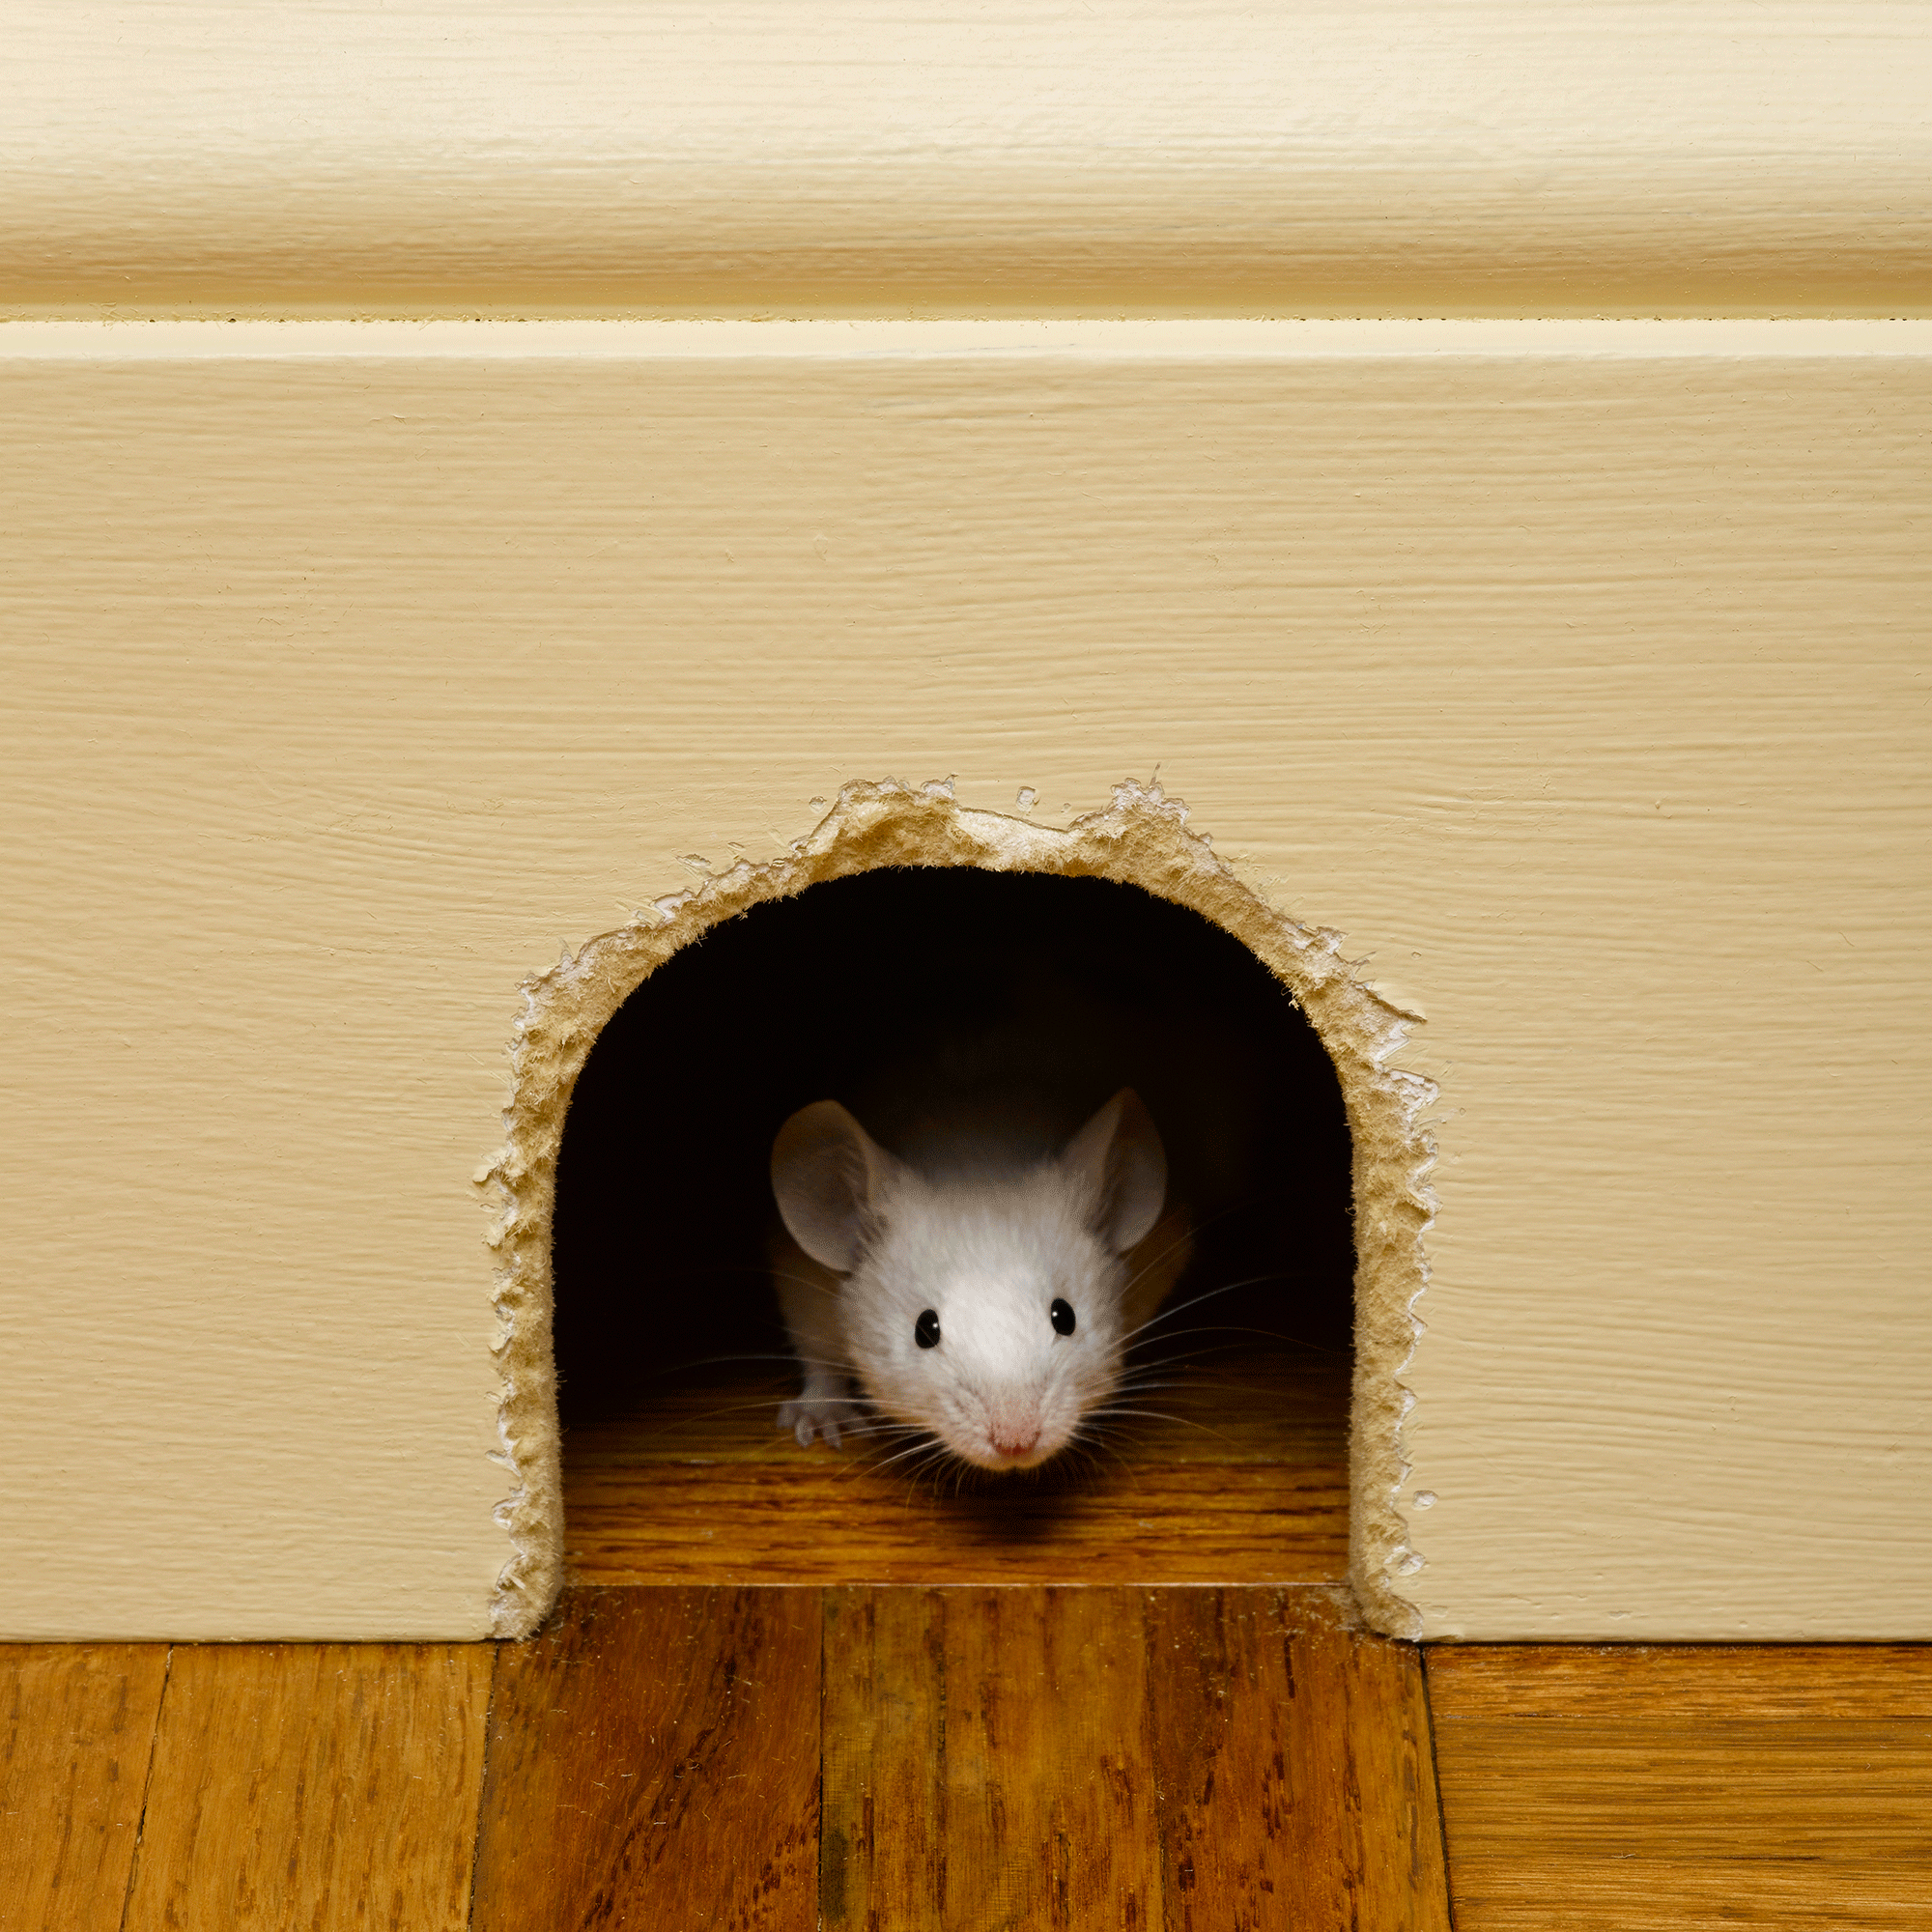 White mouse in mouse hole peeking out